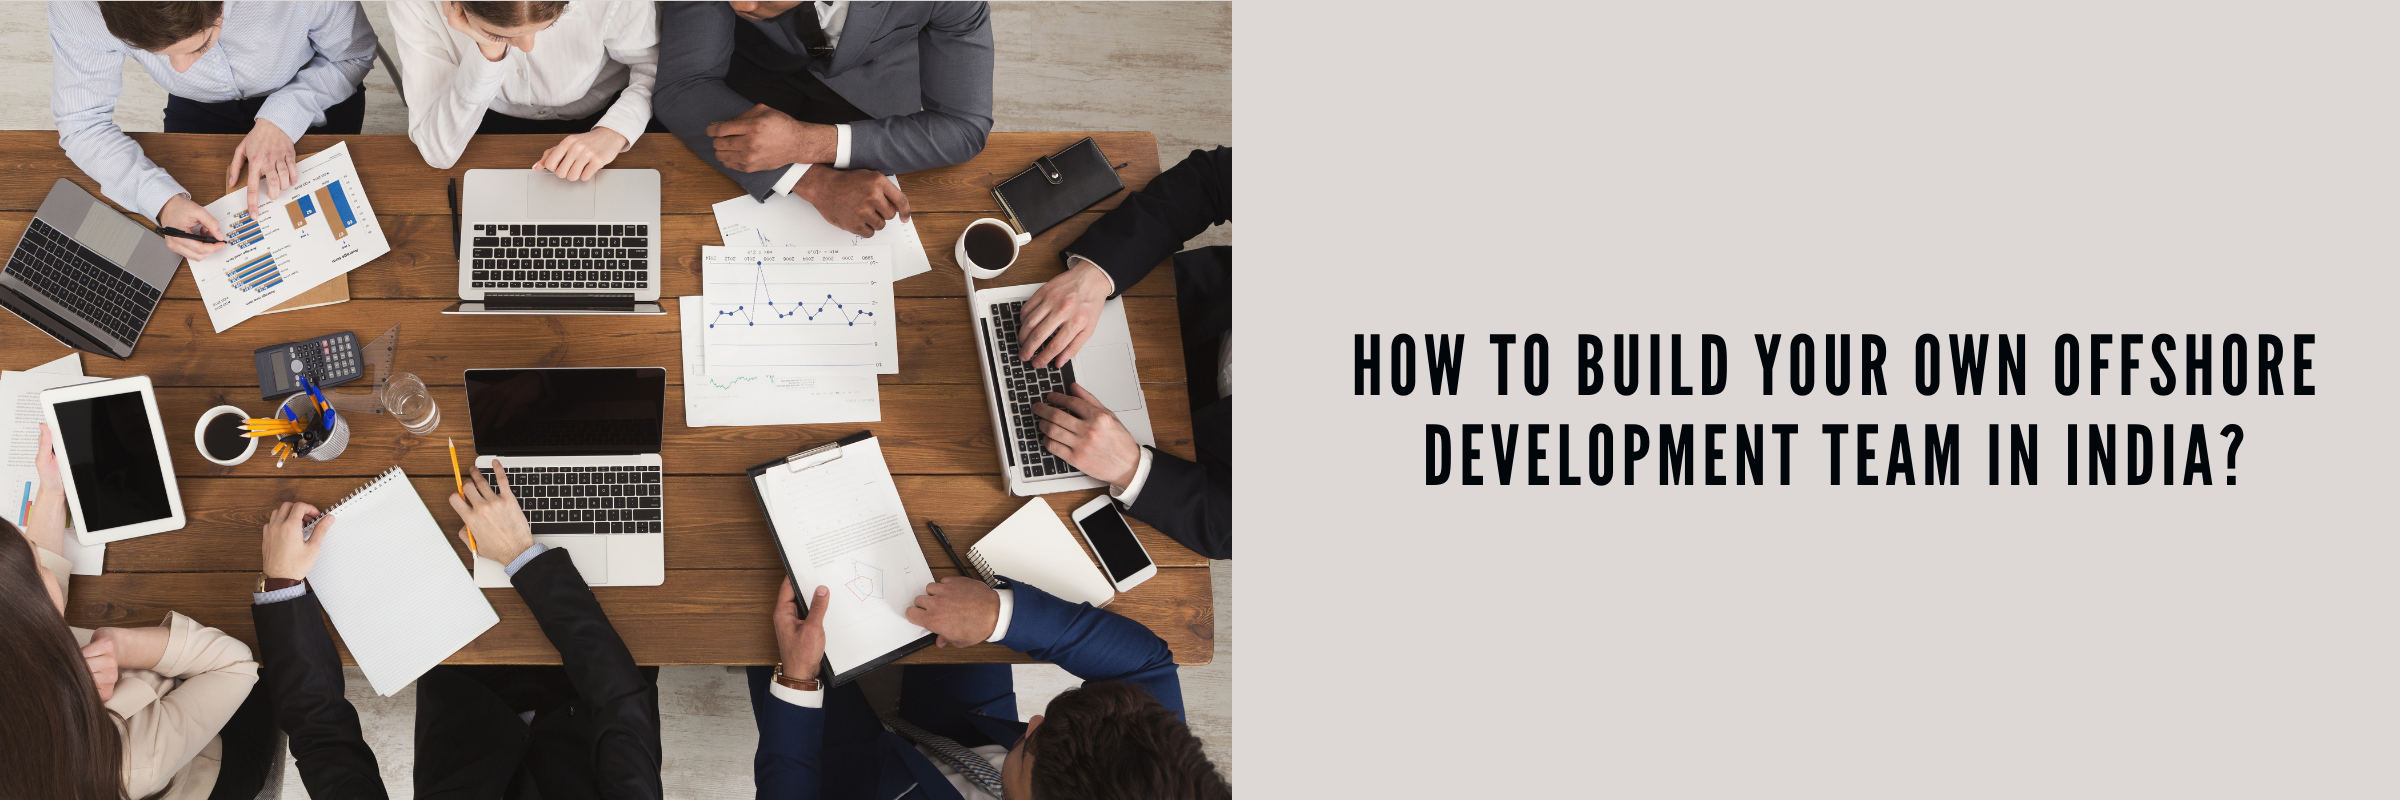 How to build your own offshore development team in India?